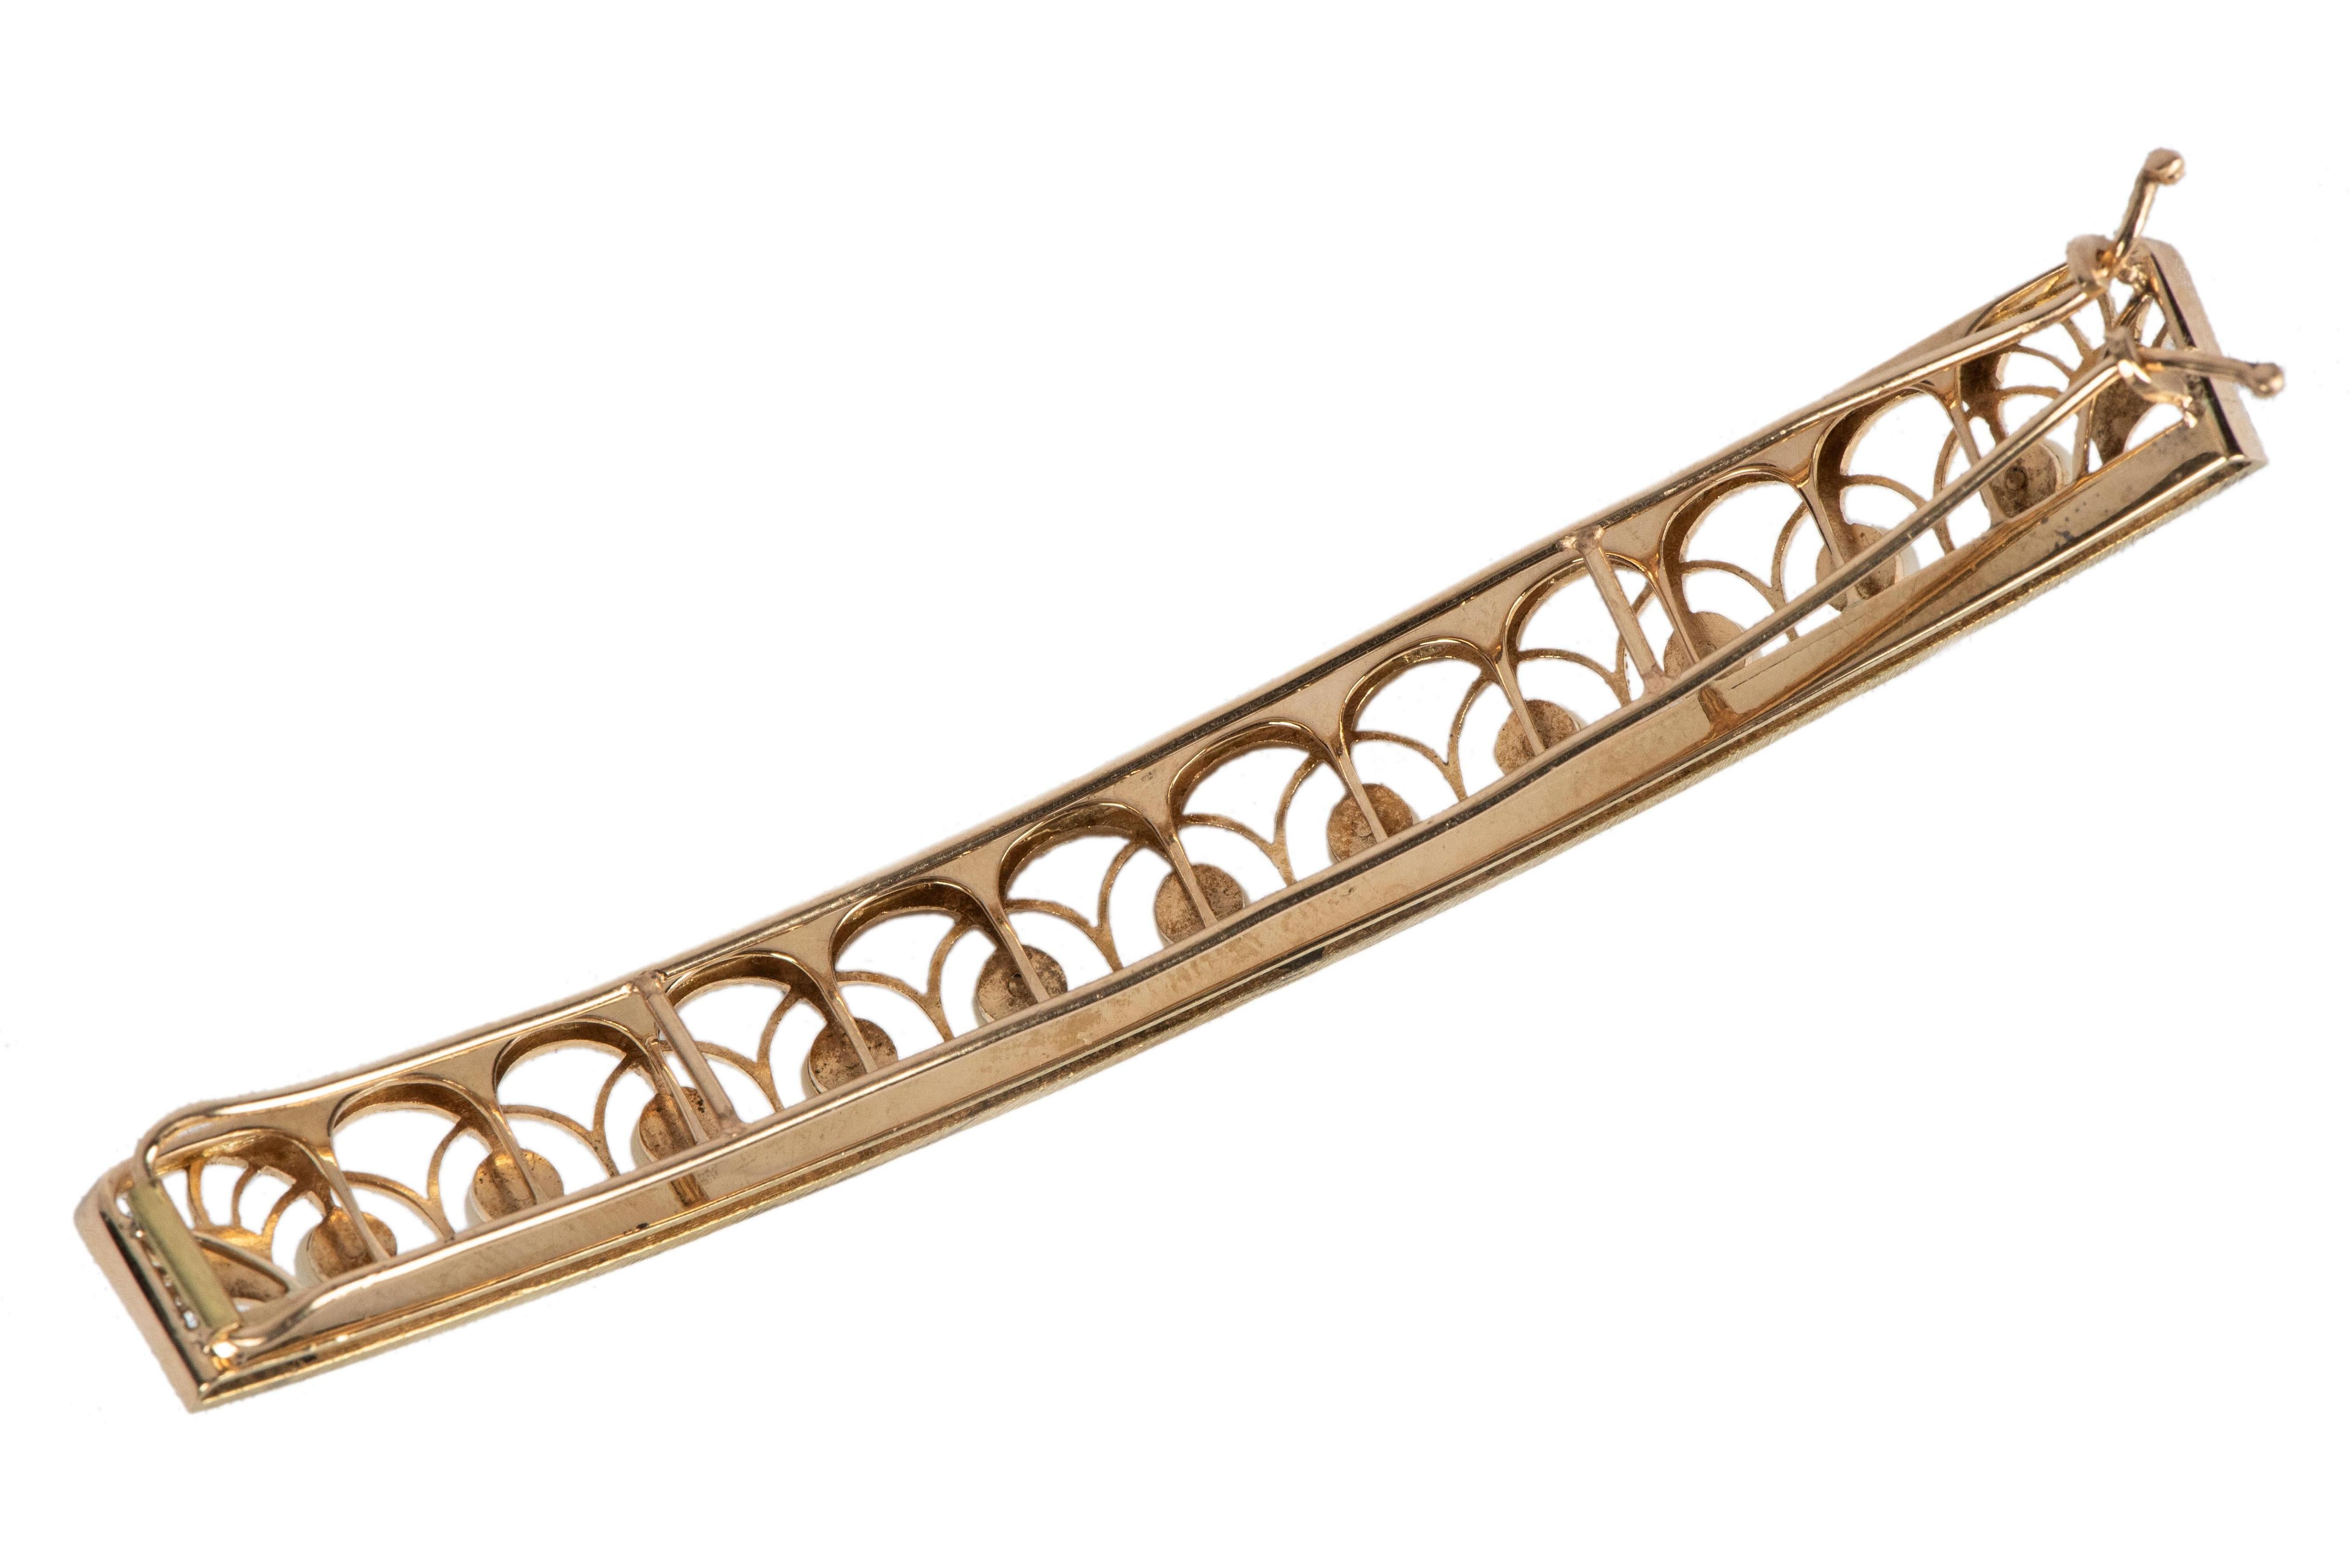 The curved openwork design of interconnected gold arches recalling an Imperial Russian tiara, enhanced by eleven lustrous natural pearls above a row of tiny seed pearls. This beautiful jewel formed part of a hair comb from tsarist Russia, era of